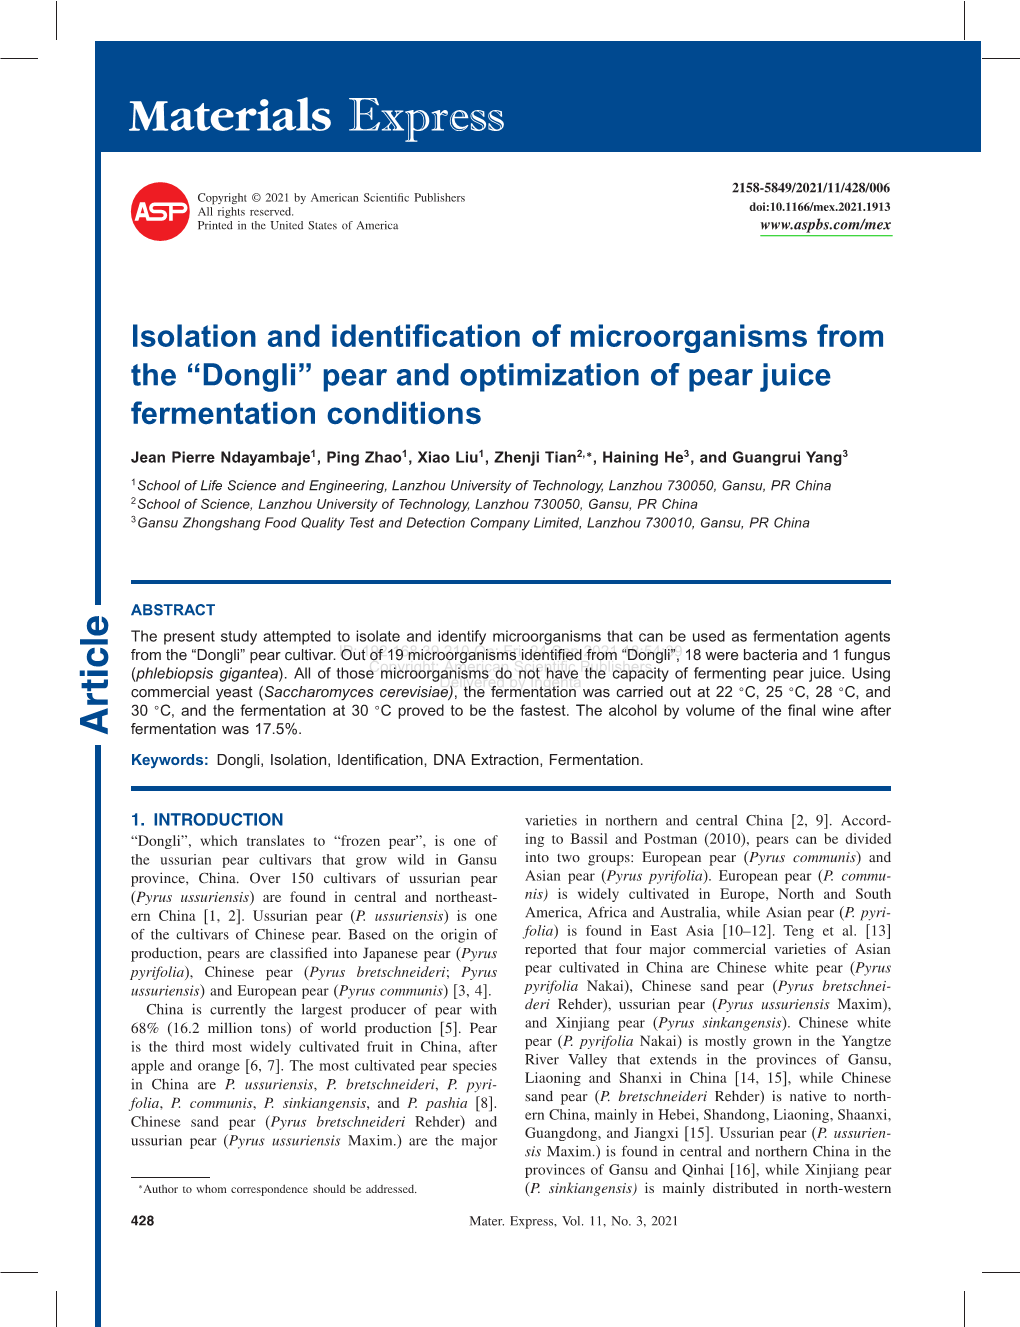 Isolation and Identification of Microorganisms from the Â